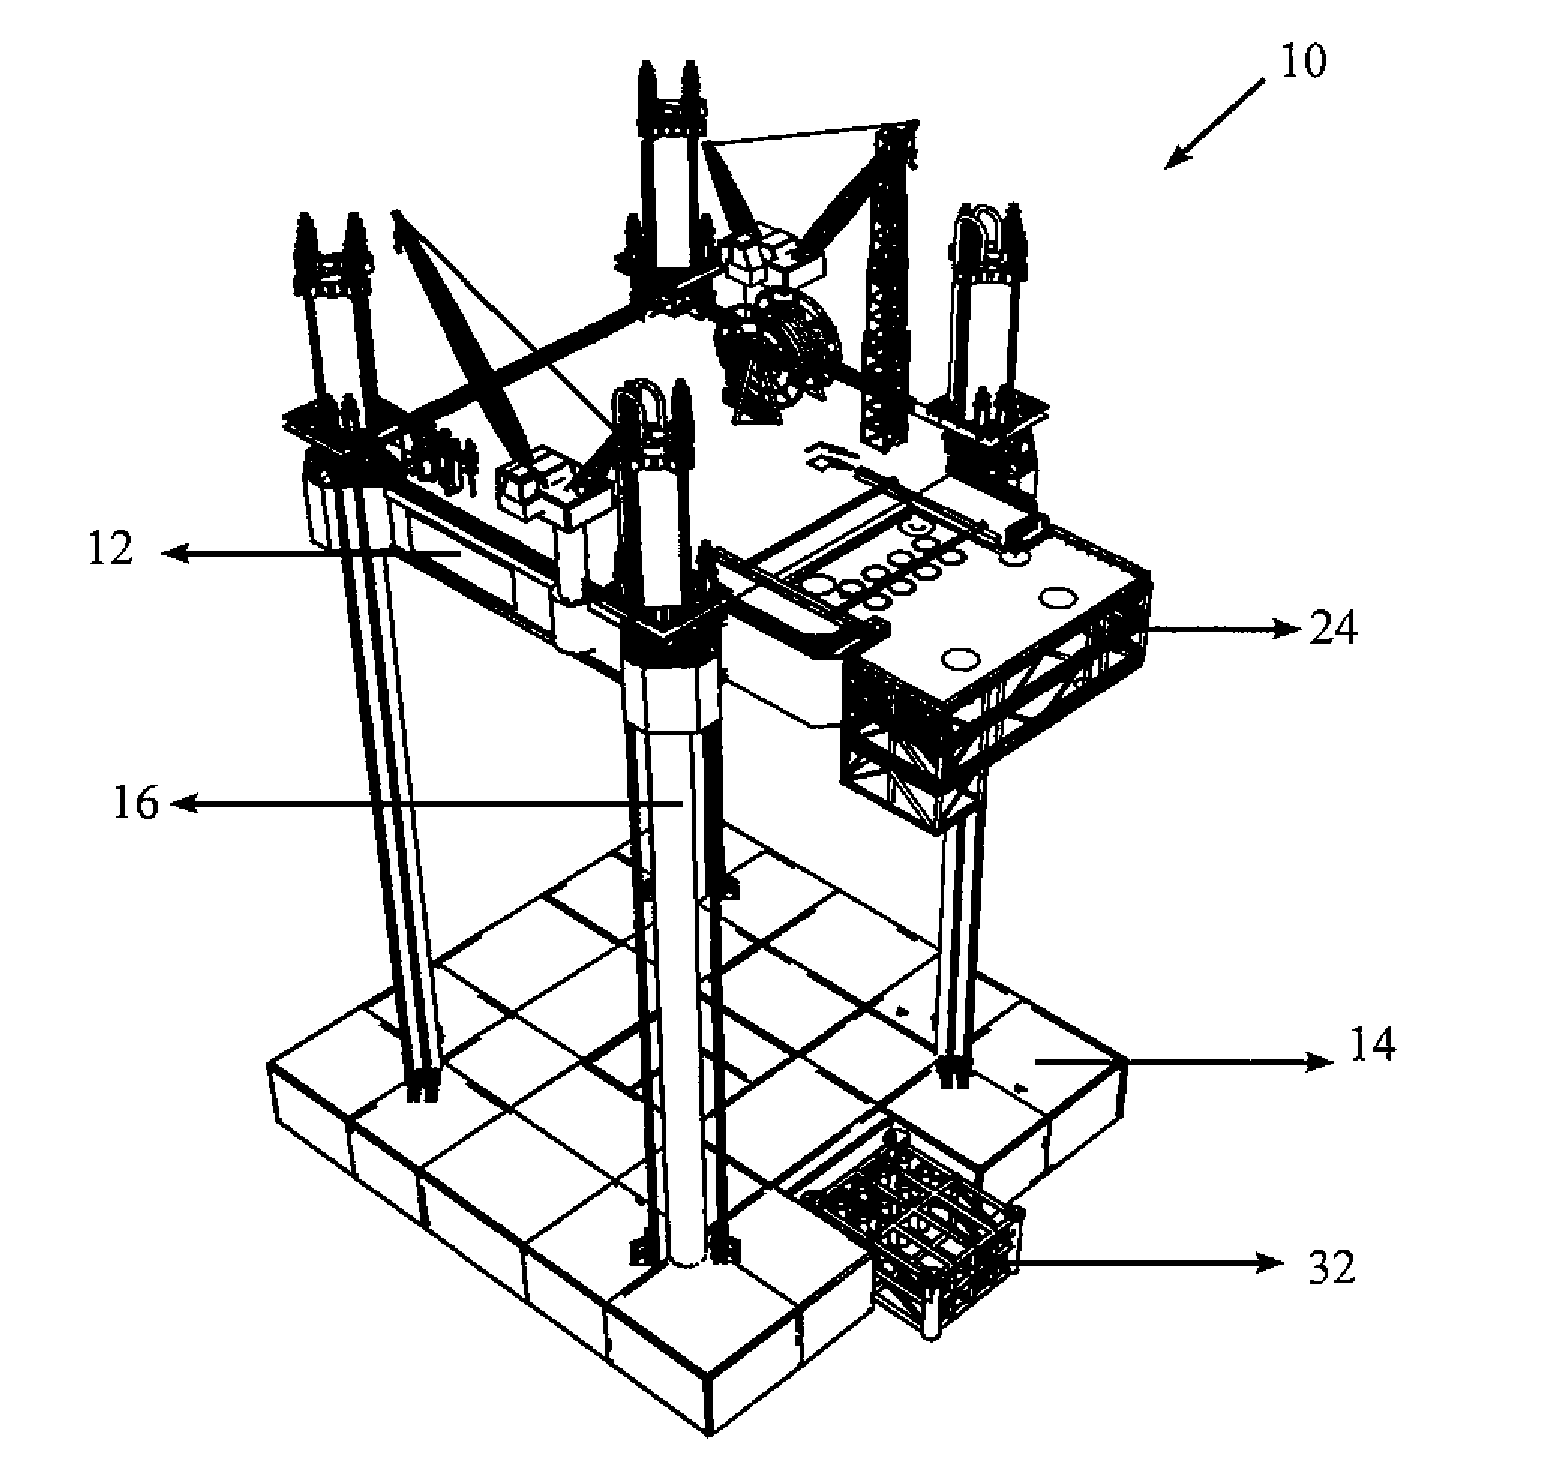 Offshore unit and method of installing wellhead platform using the offshore unit